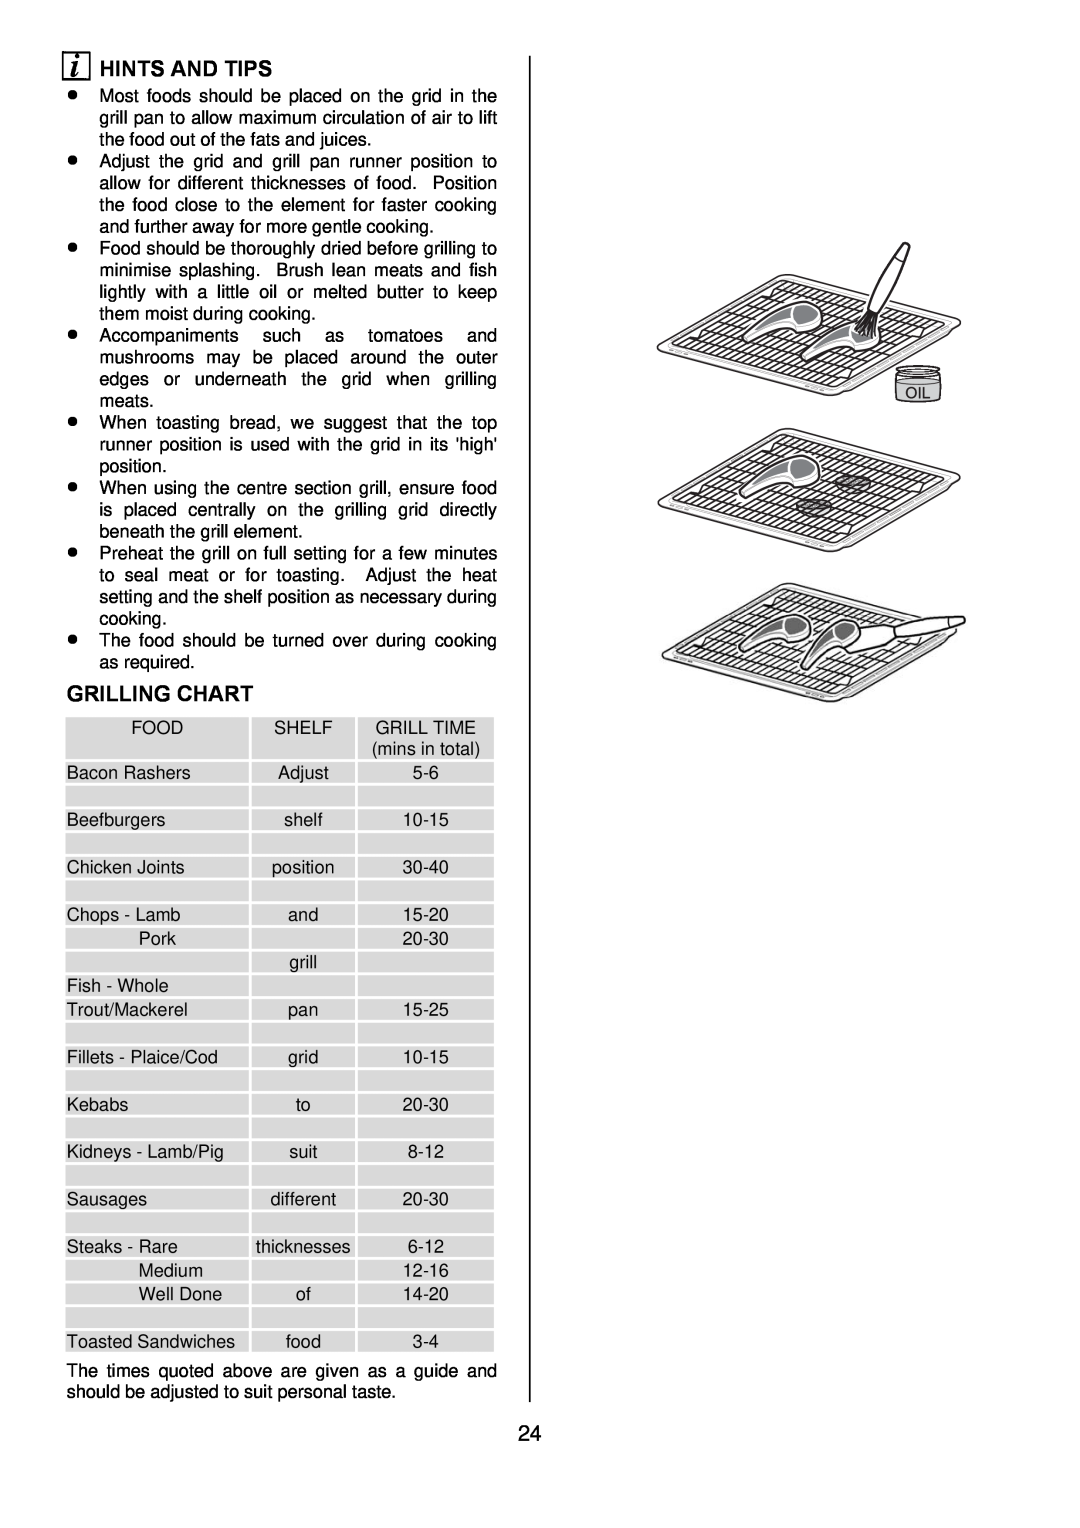 Electrolux D4101-5 manual Hints And Tips, Grilling Chart 